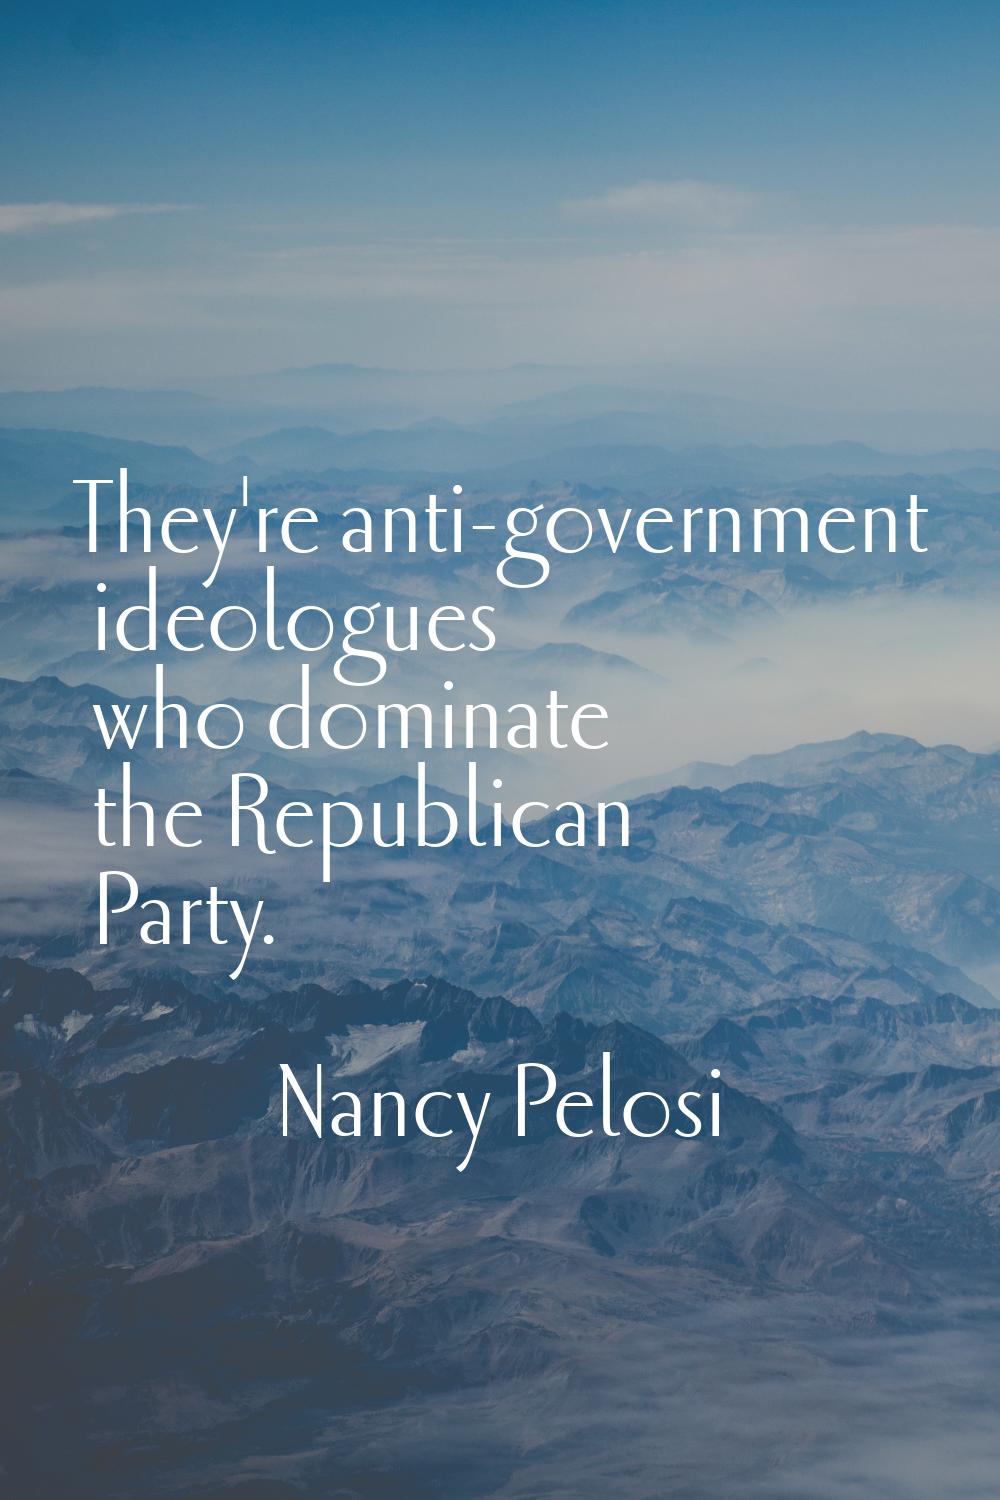 They're anti-government ideologues who dominate the Republican Party.